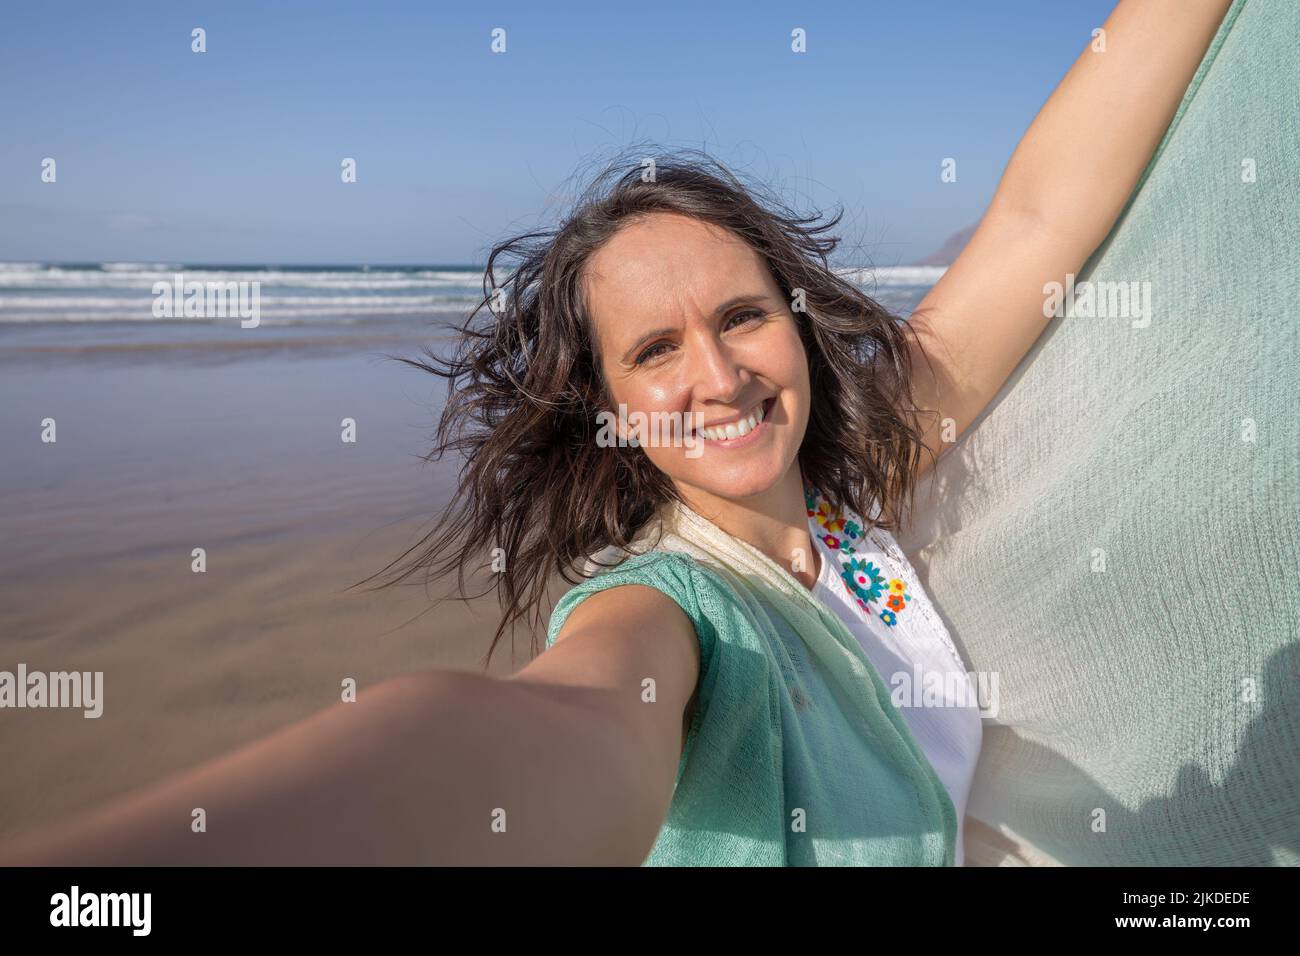 Merry middle aged female tourist with dark hair raising arm with scarf and looking at camera with smile while taking selfie against waving sea and Stock Photo